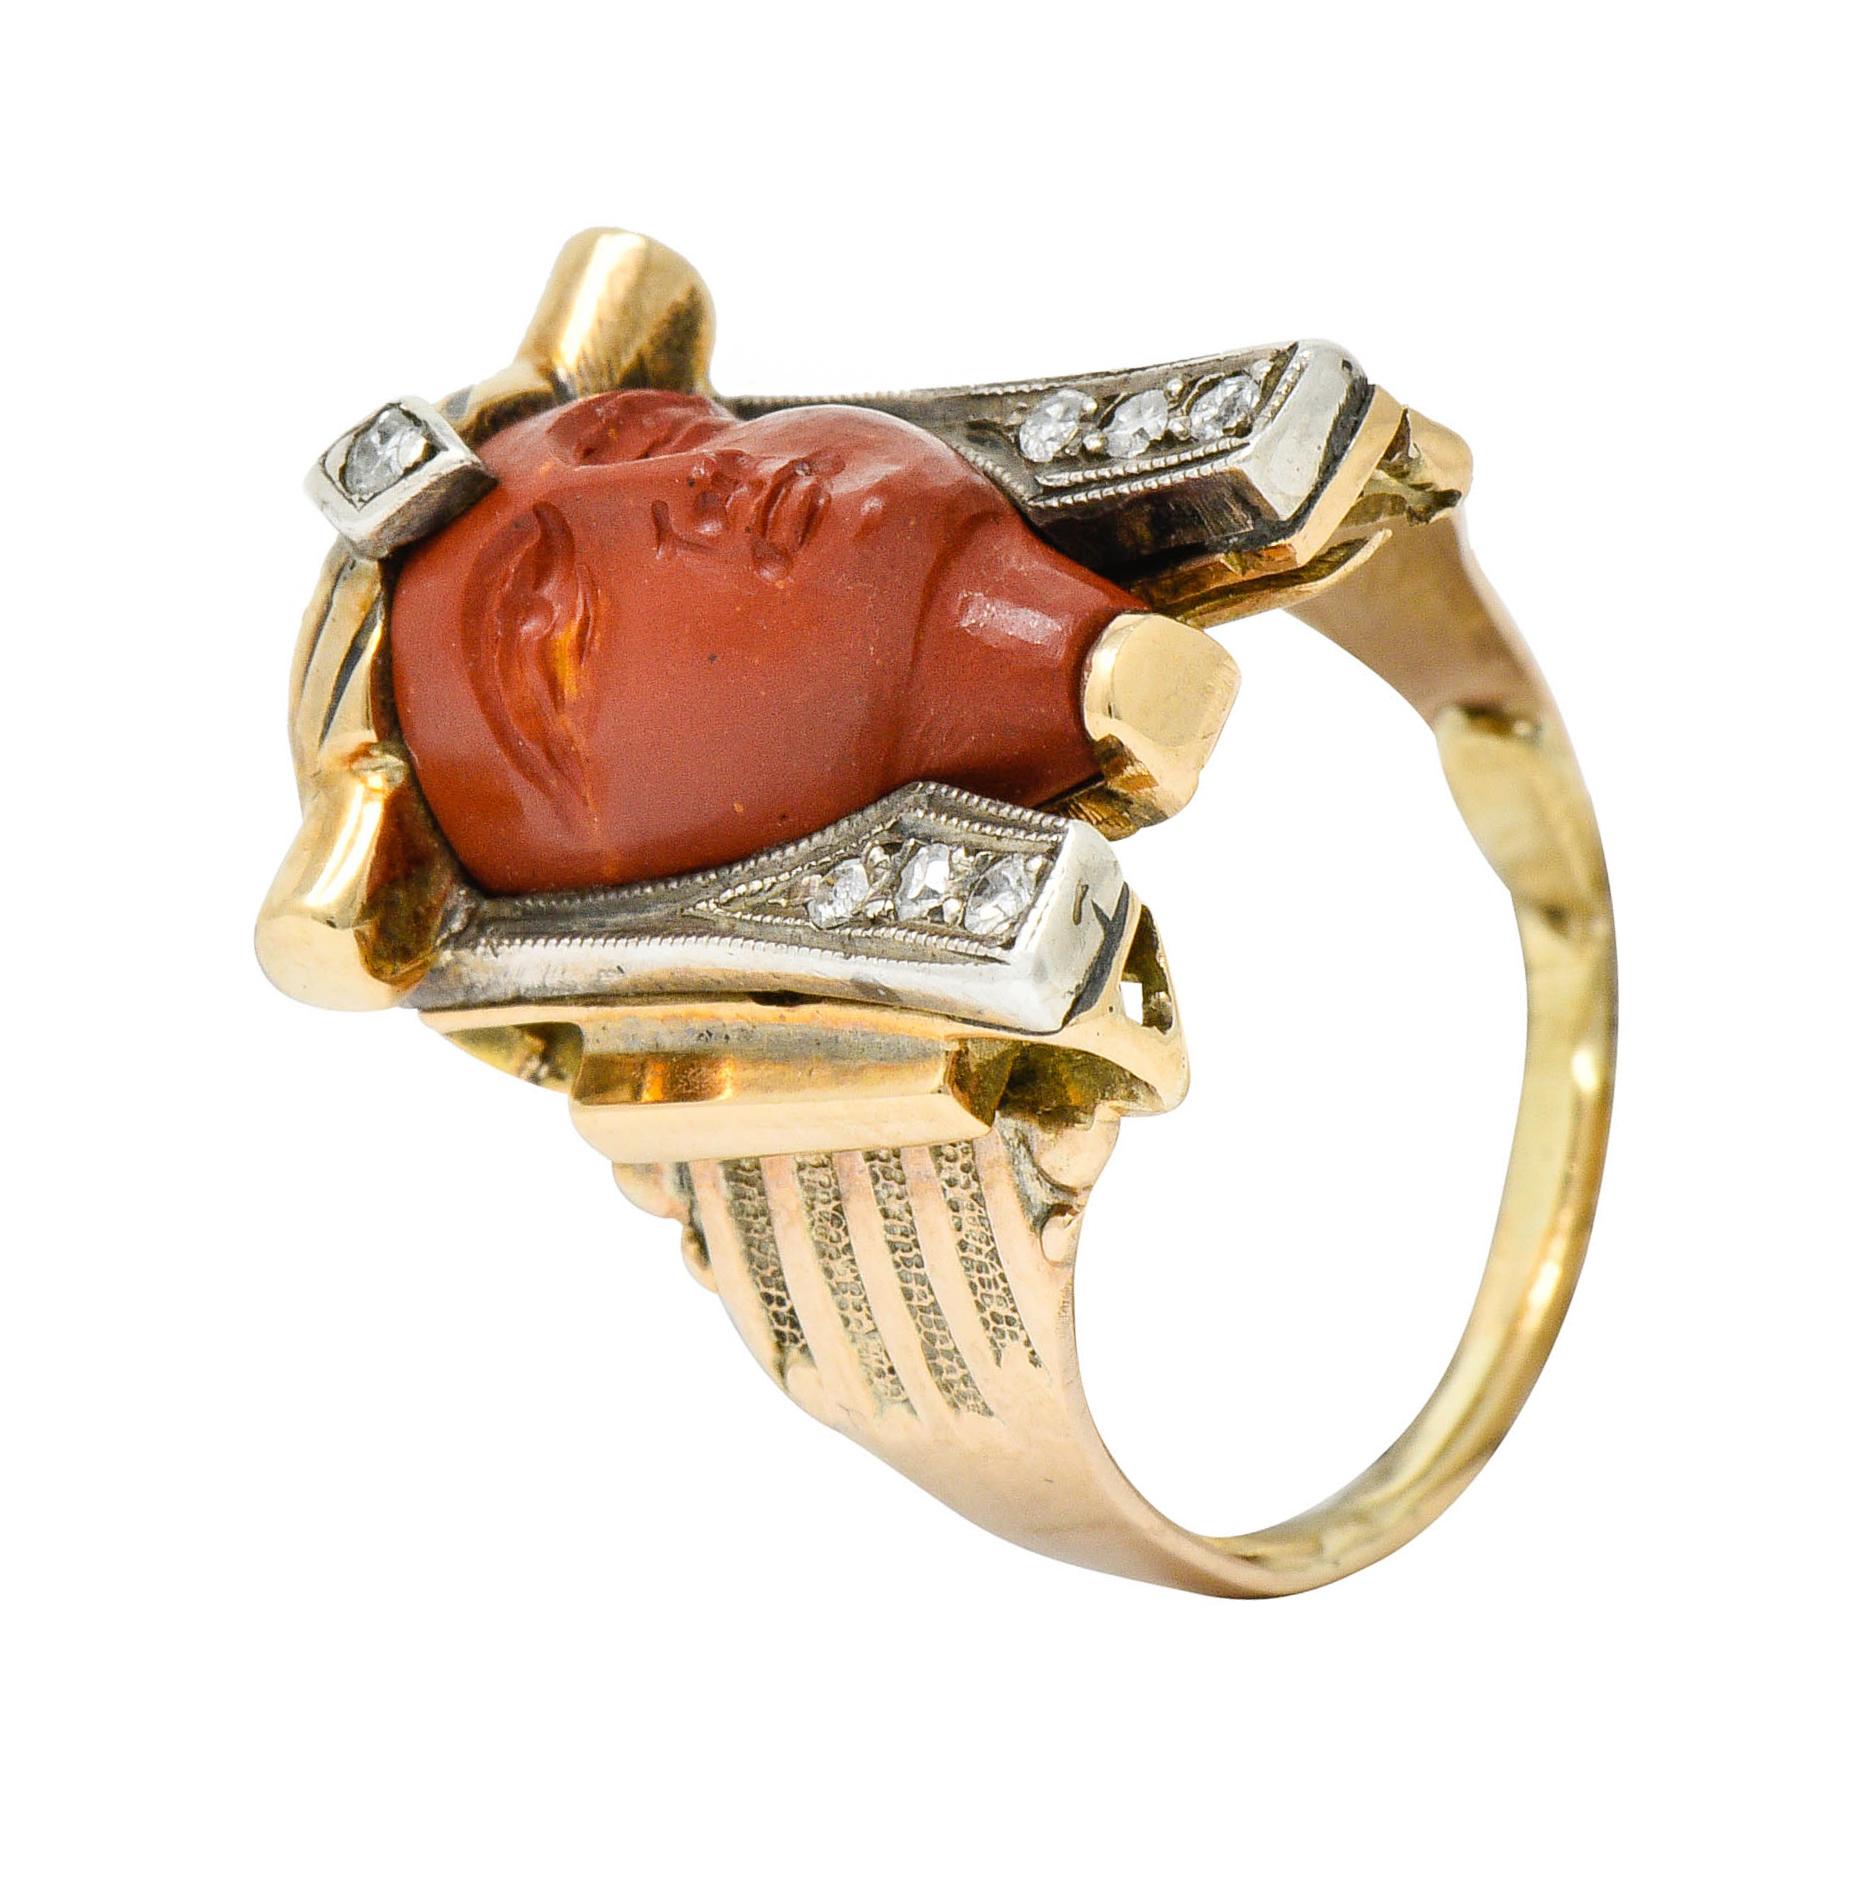 Revival ring is designed as a stylized Pharaoh with deeply ridged shoulders

Face is deeply carved jasper with brick red color and resinous luster

Headdress is accented by single cut diamonds weighing in total approximately 0.10 carat; quality